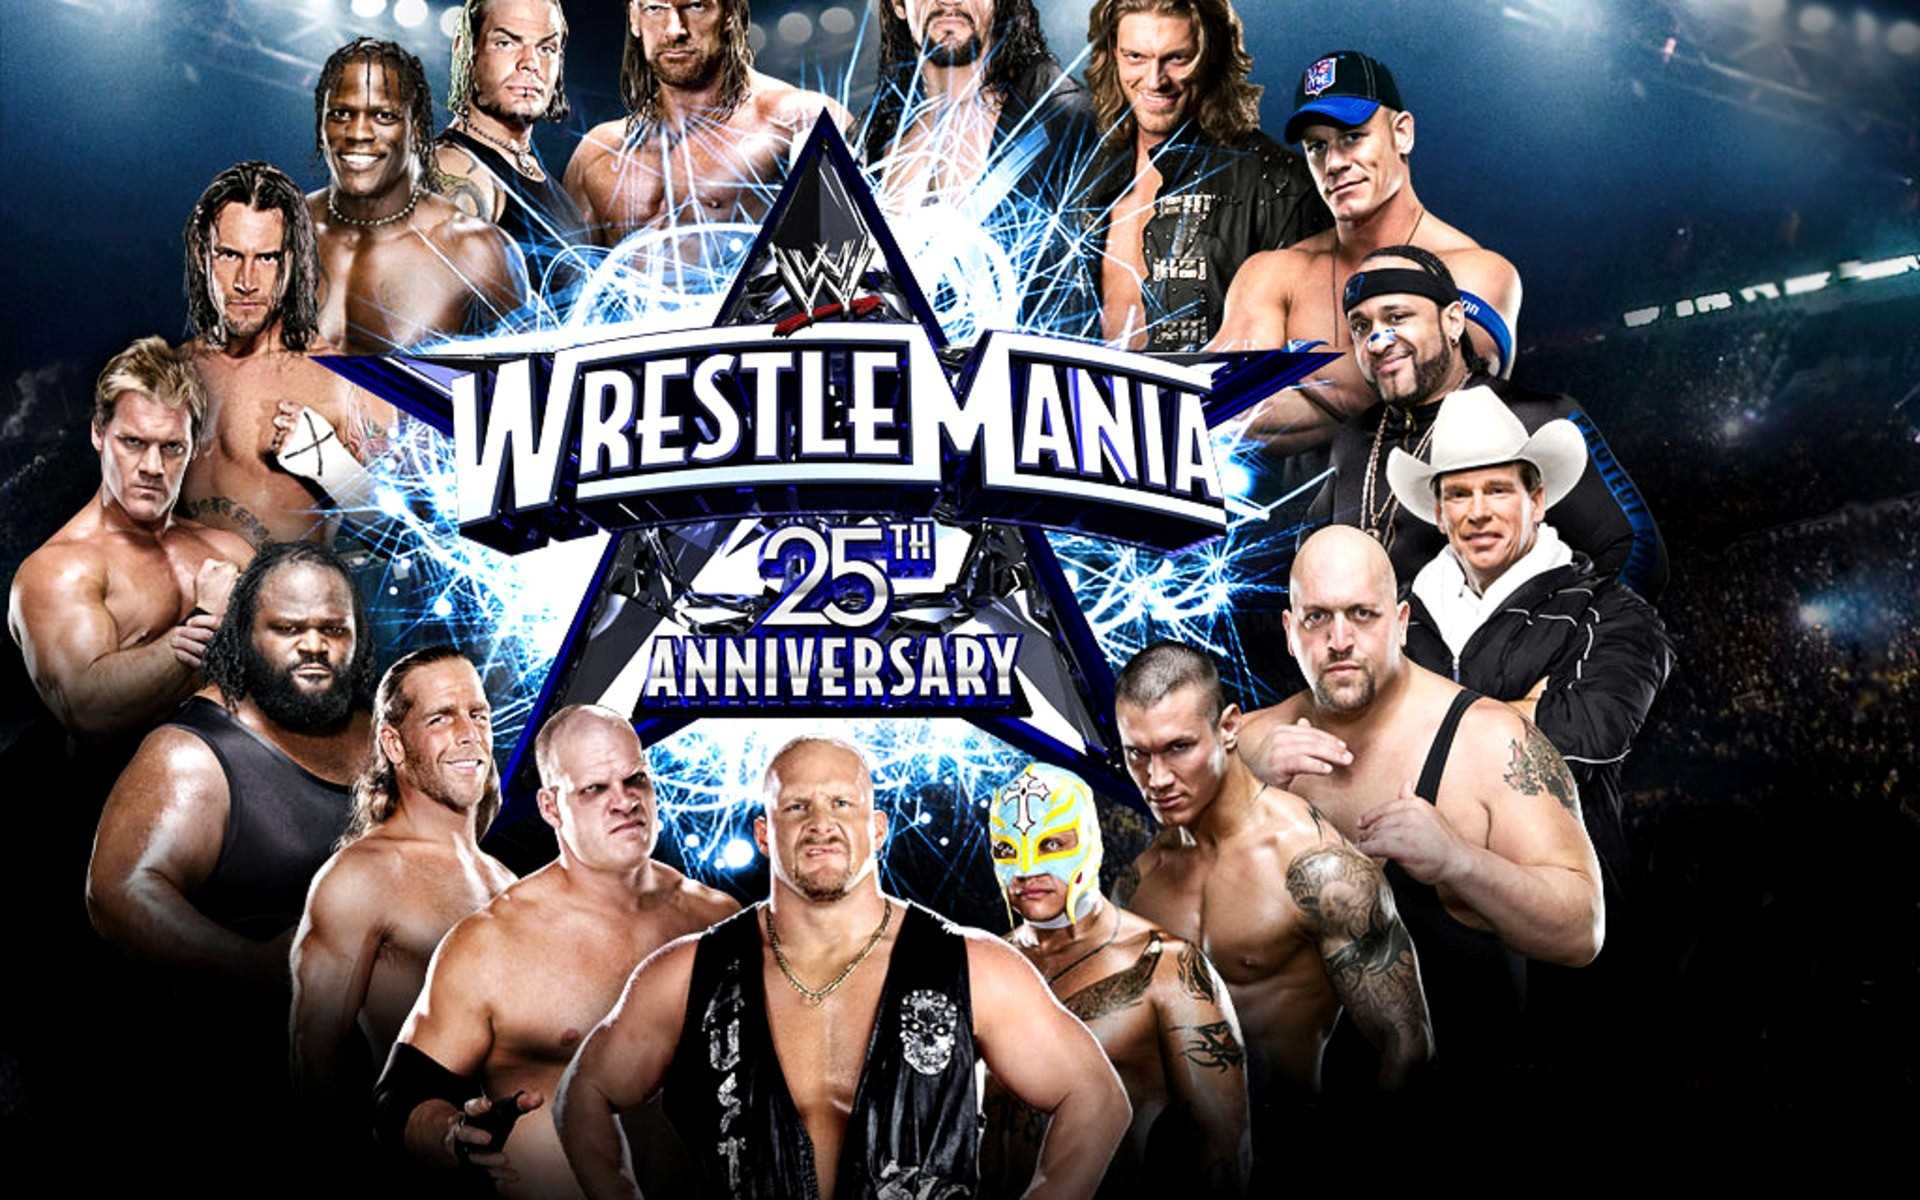 WWE Wallpapers HD Best Collection Of WWE Wrestlers